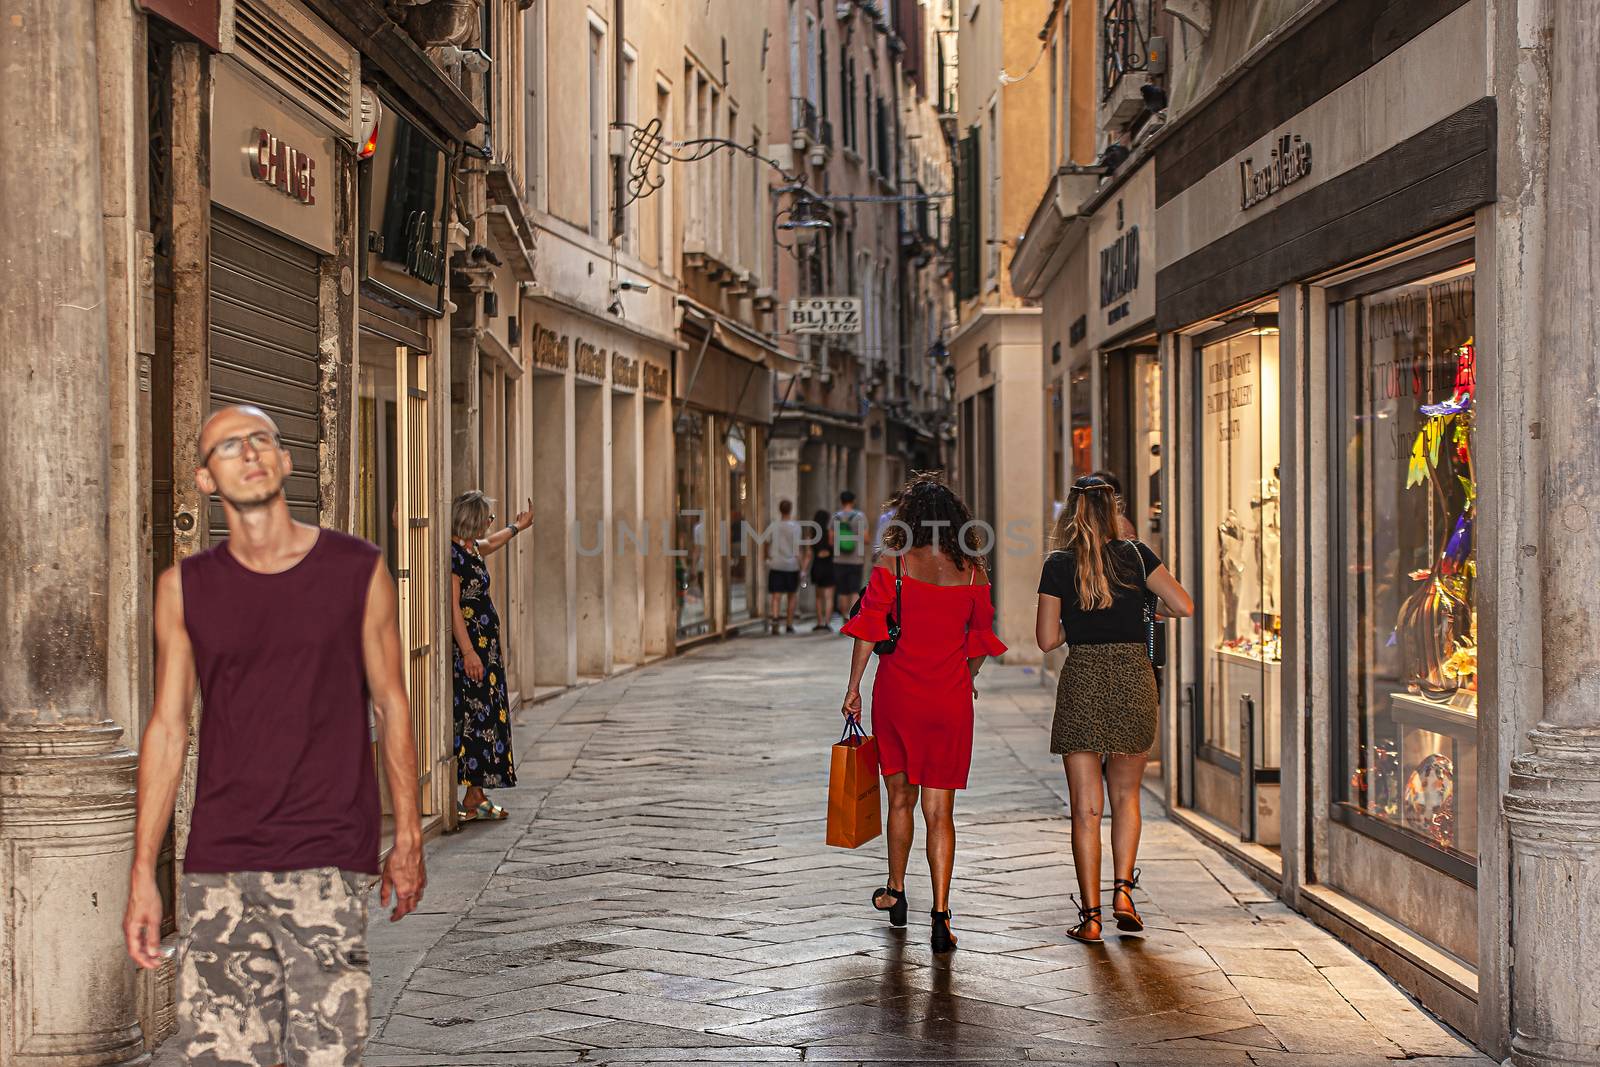 People in Venice alley by pippocarlot